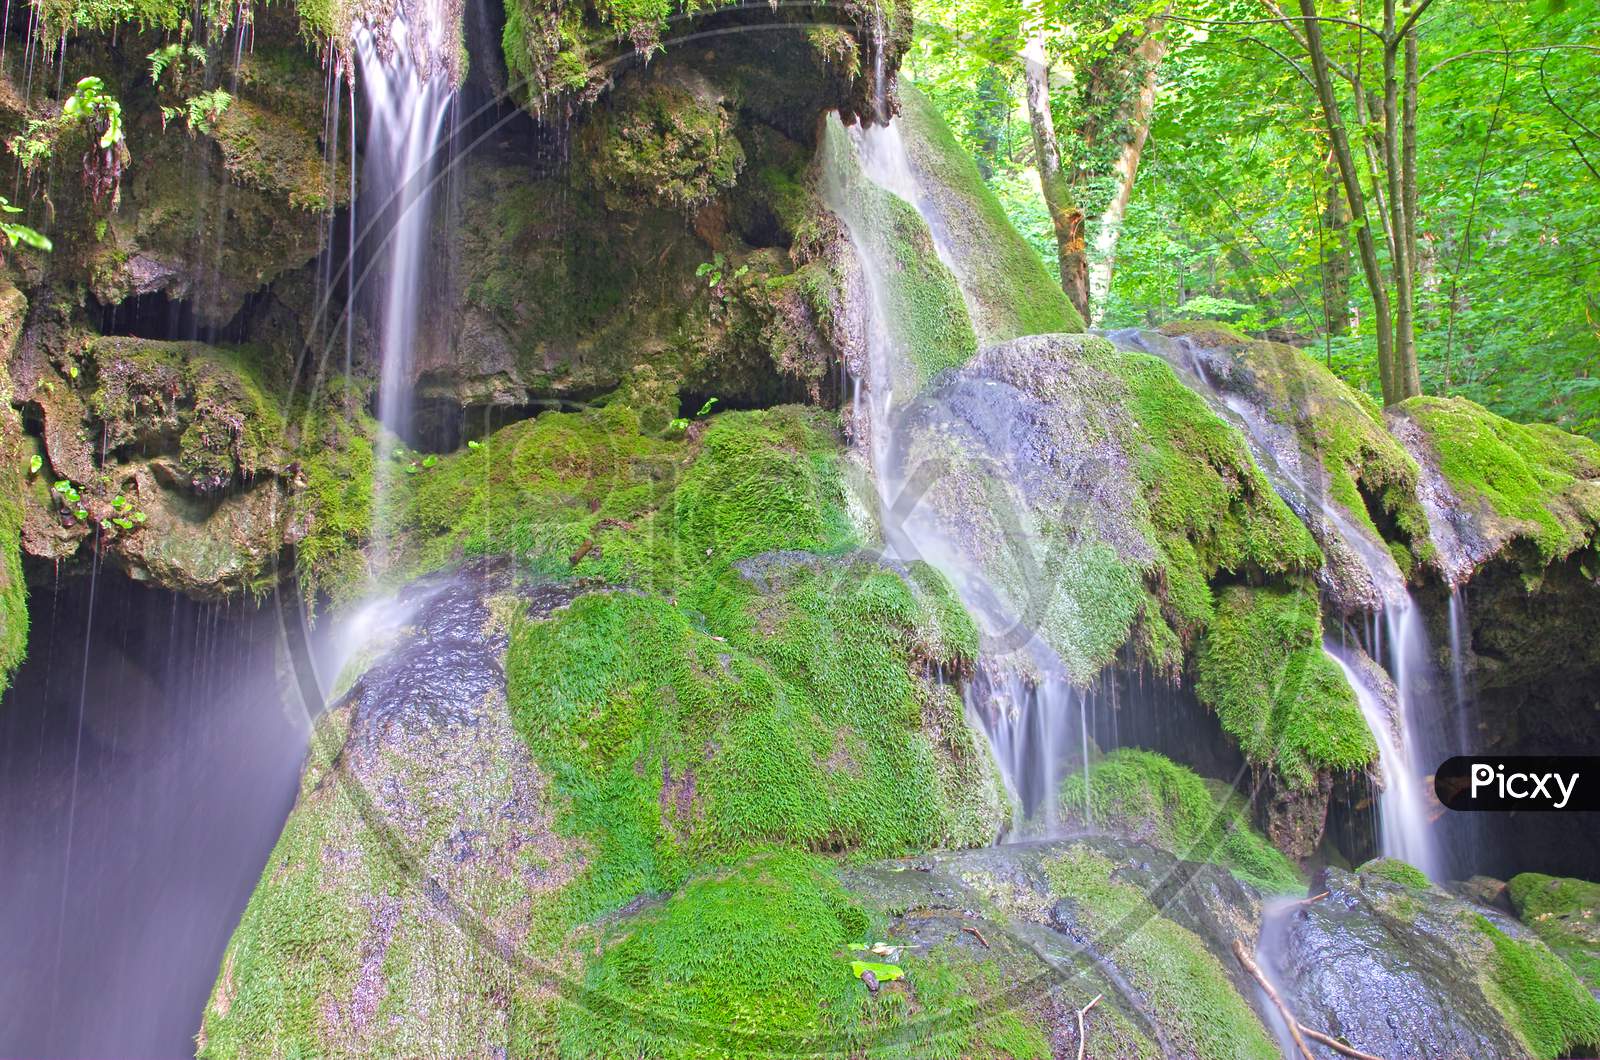 Flowing Water On Rocks And Moss